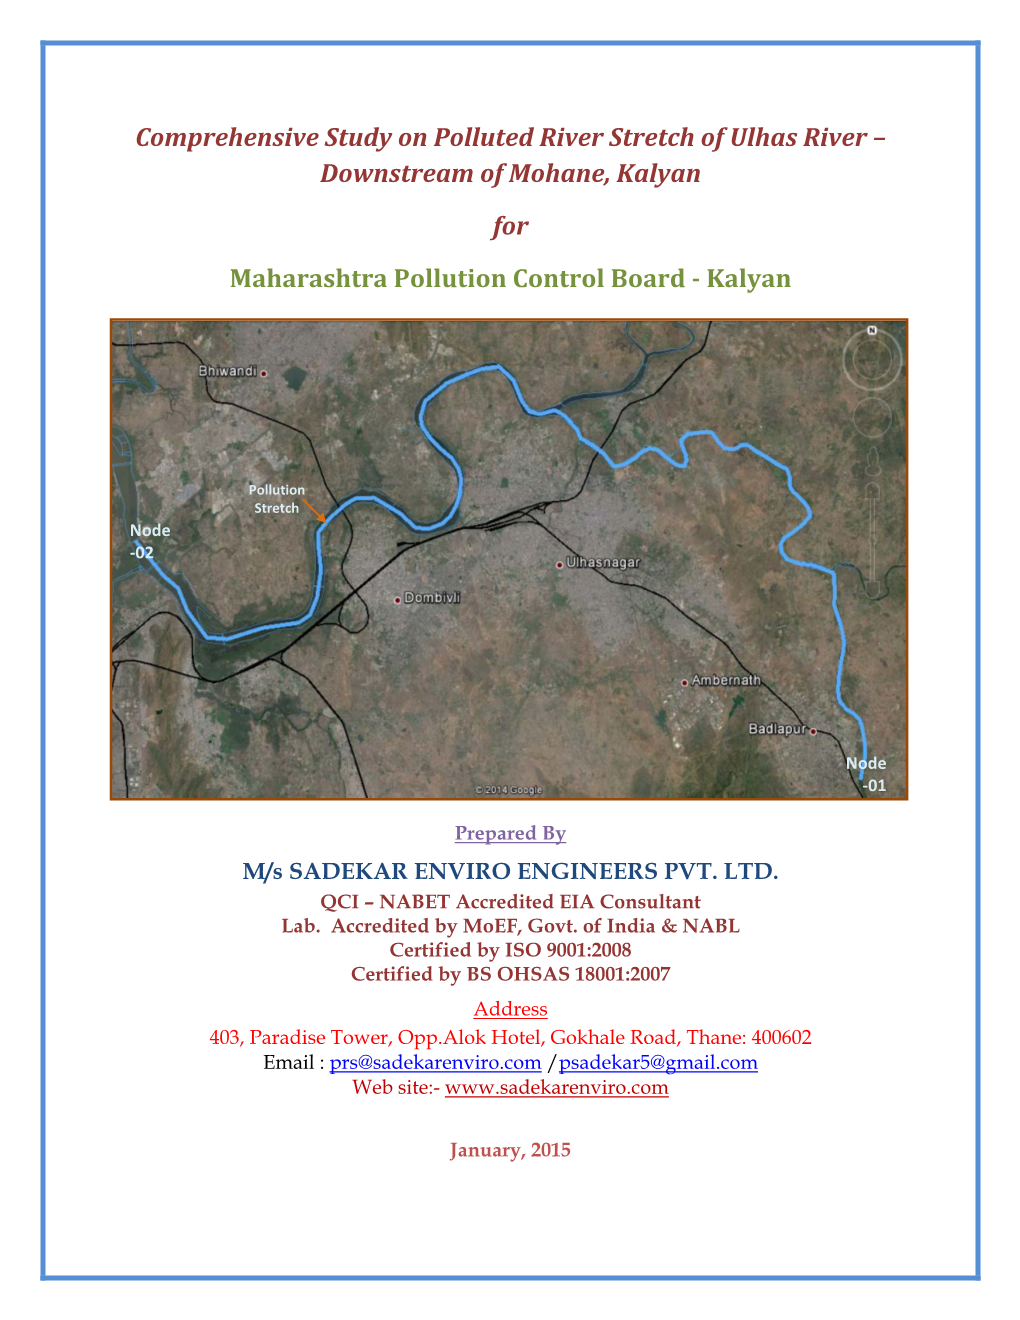 Comprehensive Study on Polluted River Stretch of Ulhas River – Downstream of Mohane, Kalyan for Maharashtra Pollution Control Board ­ Kalyan